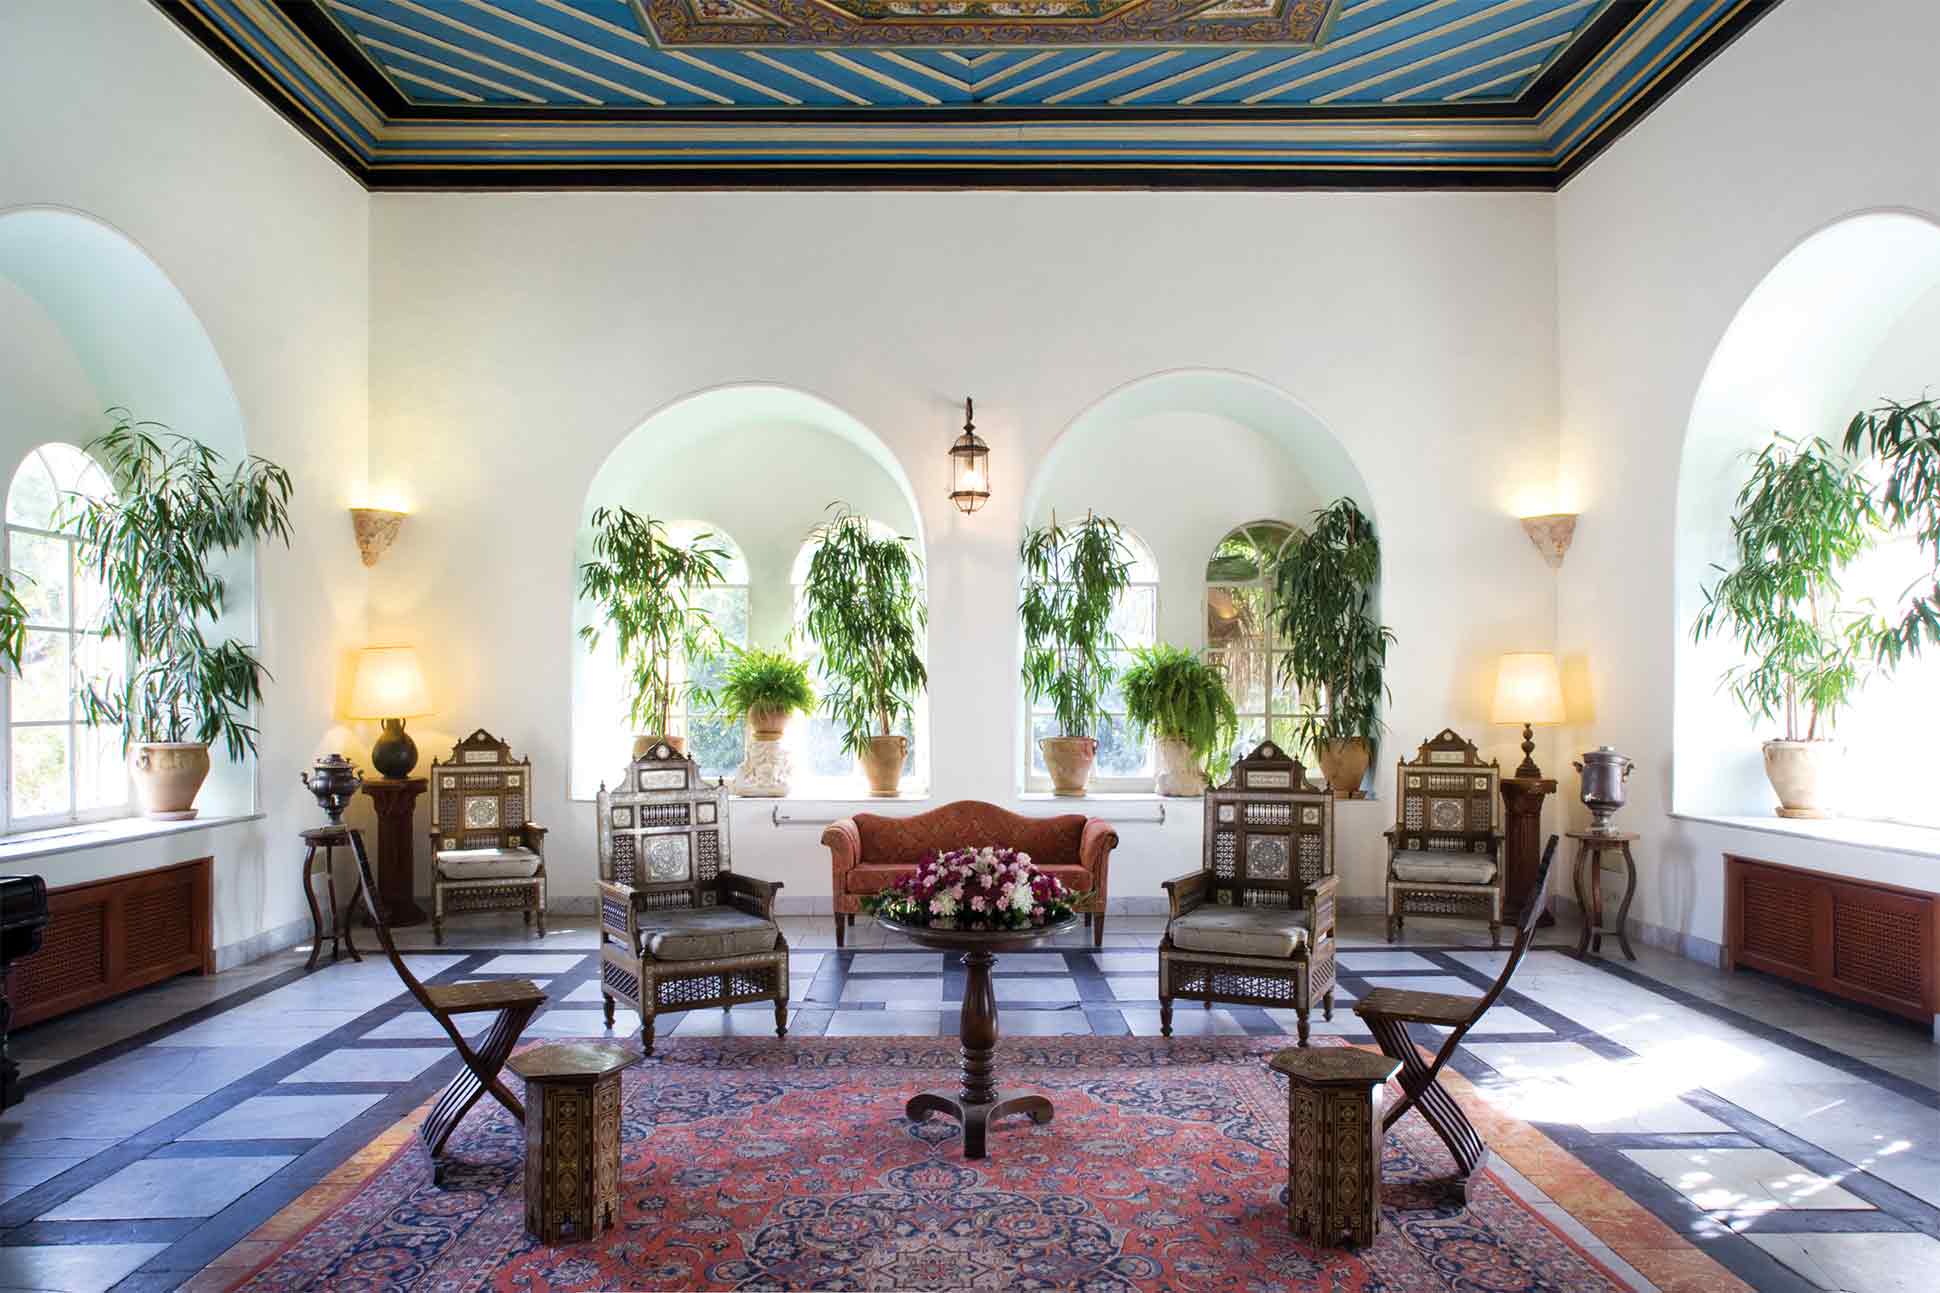 The Pasha Hall at The American Colony Hotel, Jerusalem, Israel